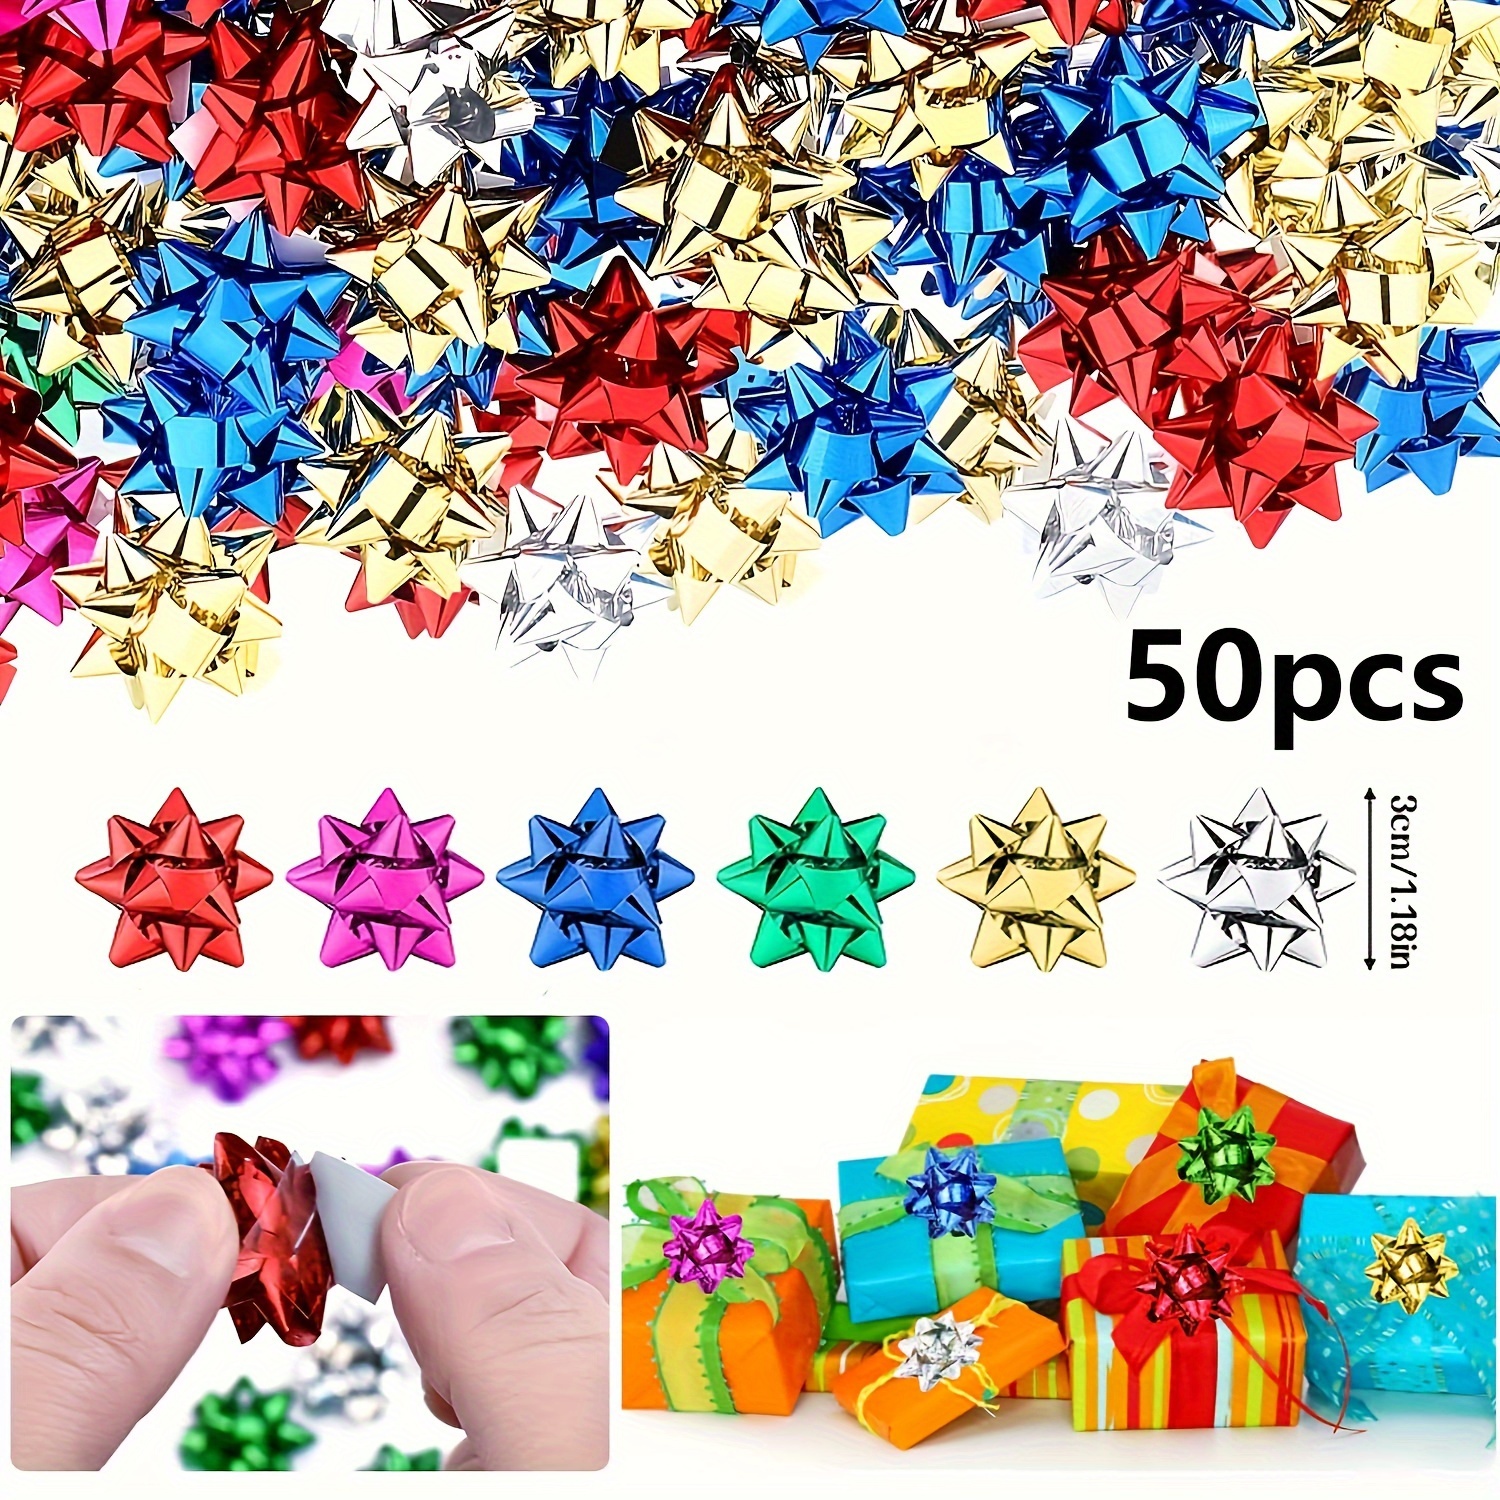 E-Ronic 120pcs Mini Gift Bow, 1 inch Metallic Star Bow Small Tiny Stick on Bows for Present Holiday Christmas Birthday Party Decoration Wrapping